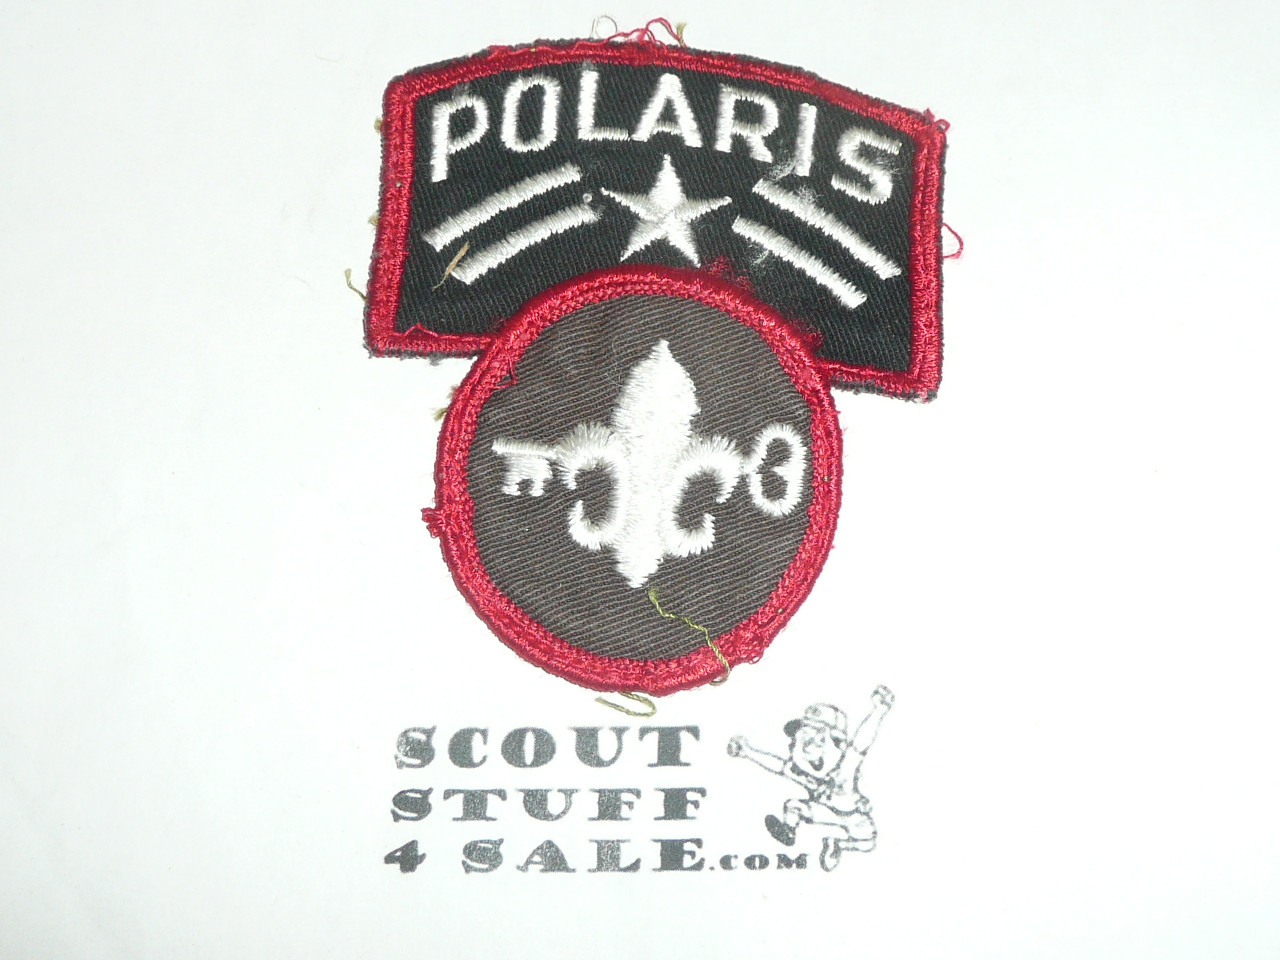 Crescent Bay Area Council, Polaris One Star Patch with Key Patch, used